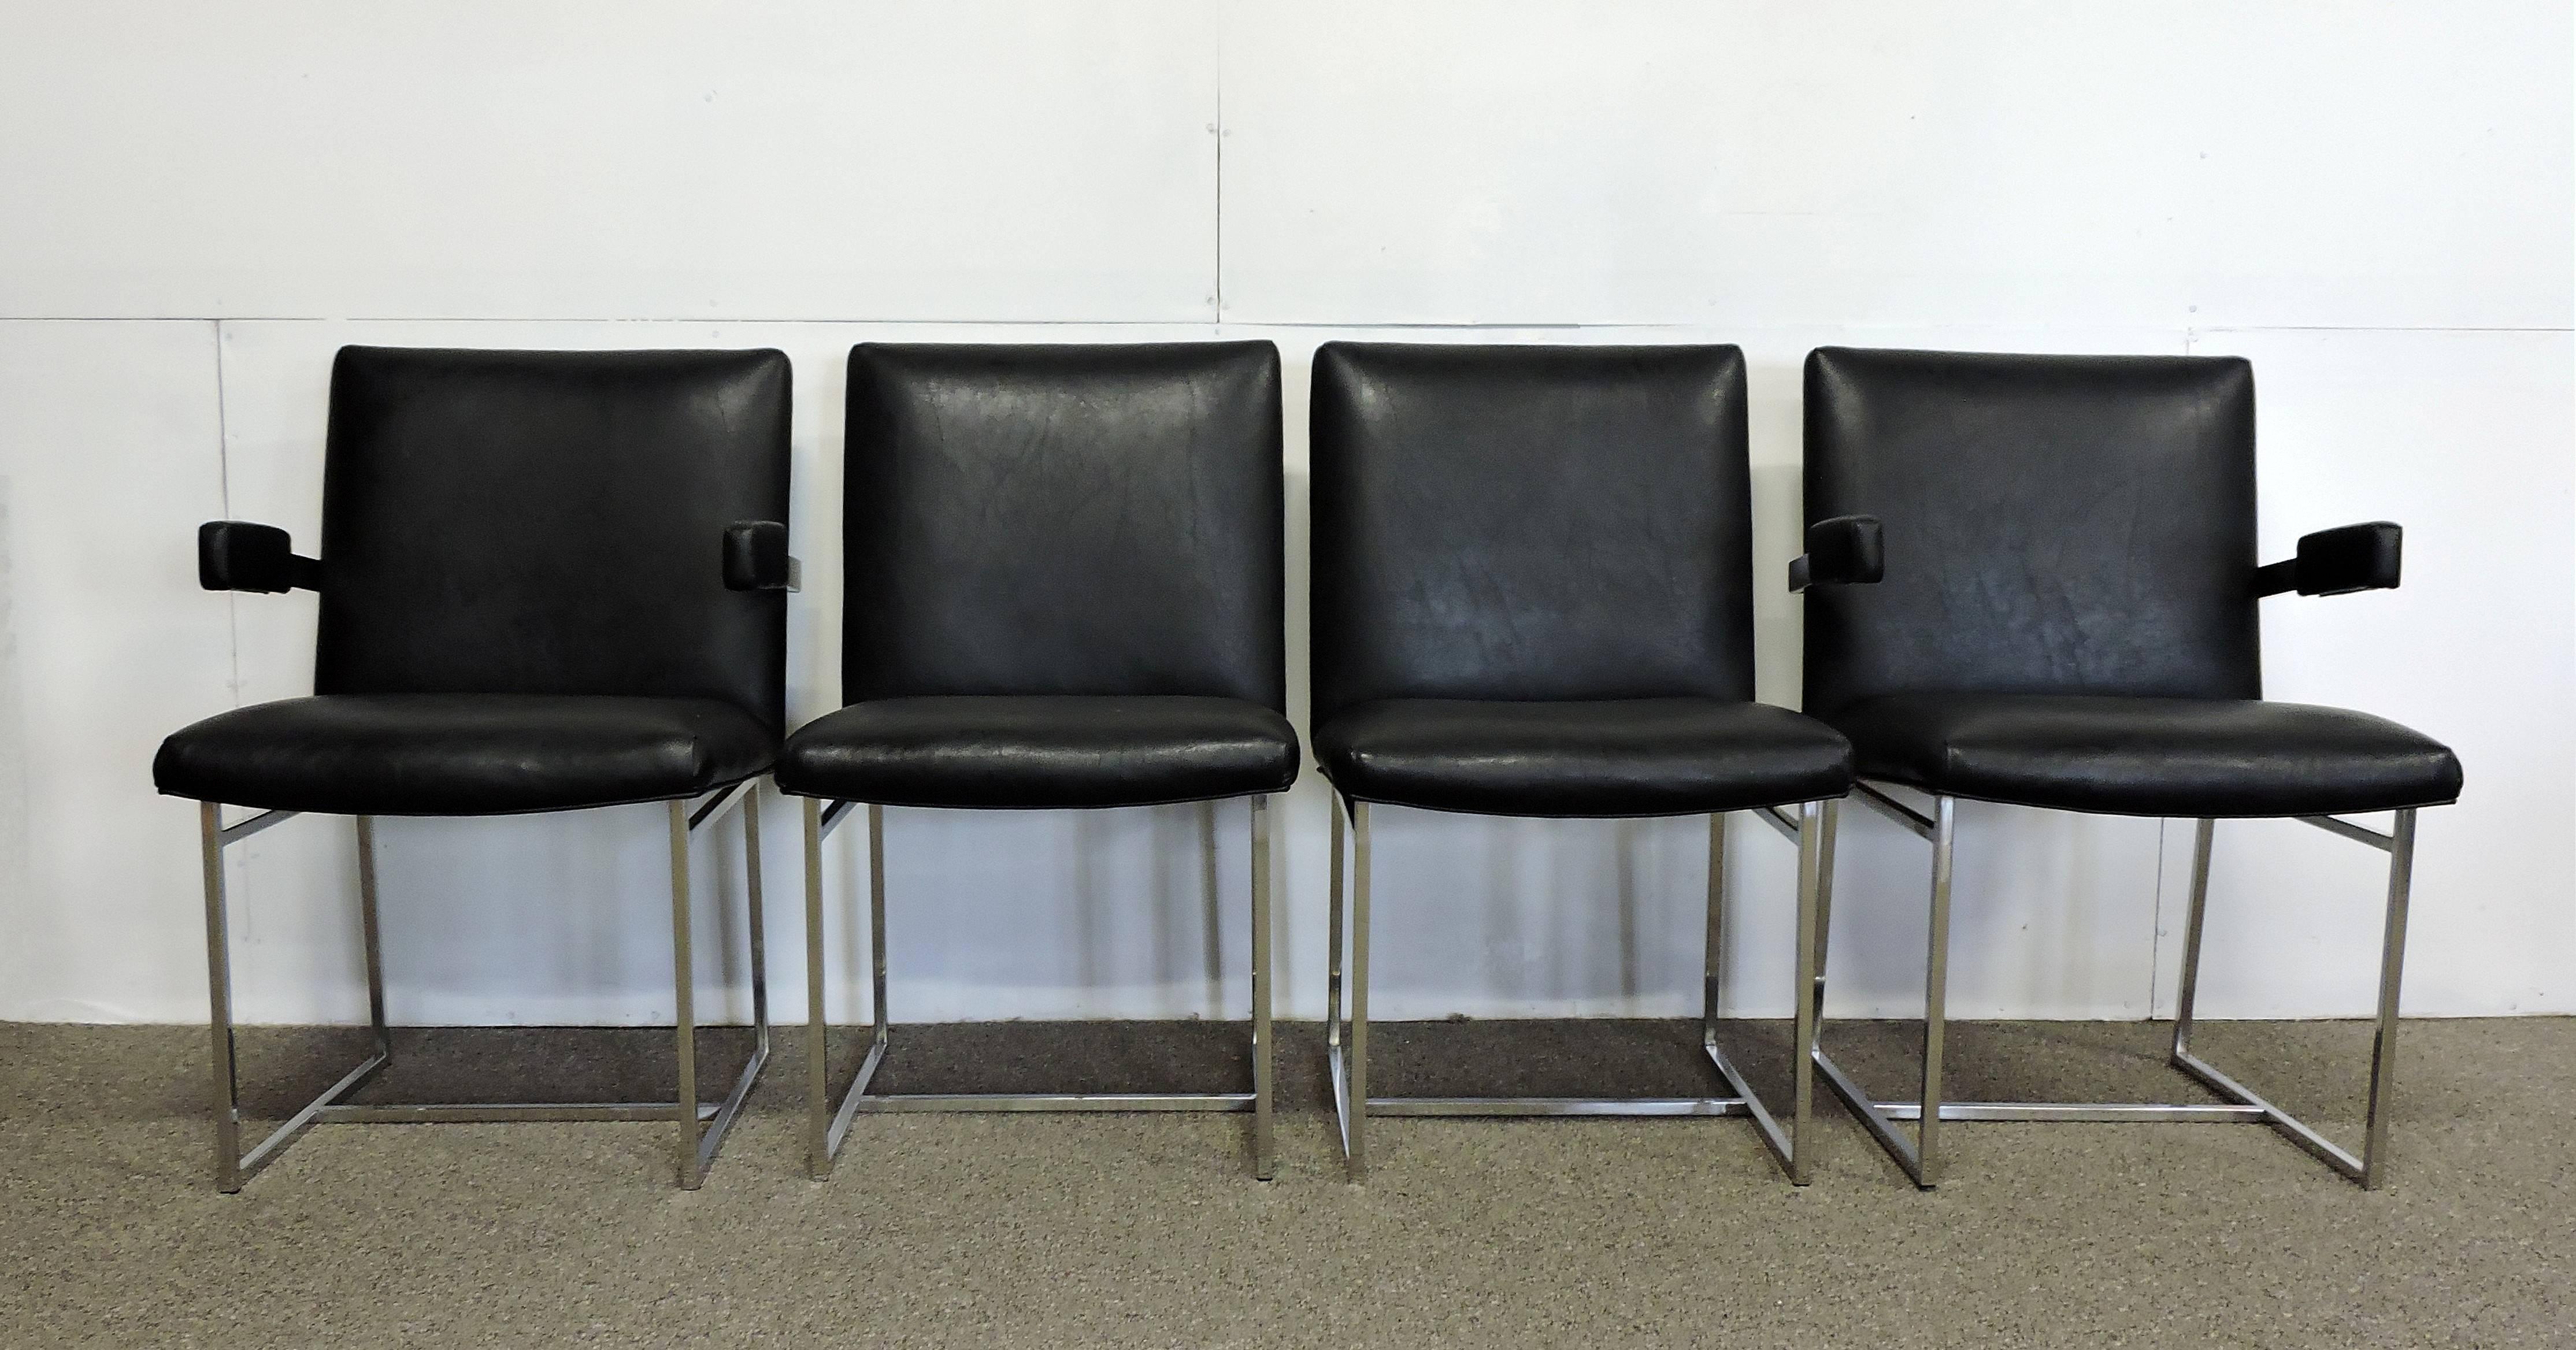 Beautiful set of four Milo Baughman dining chairs. These heavy and well made chairs have a clean, Classic look with thin chrome frames and black Naugahyde upholstery. This set includes two arm chairs and two side chairs.